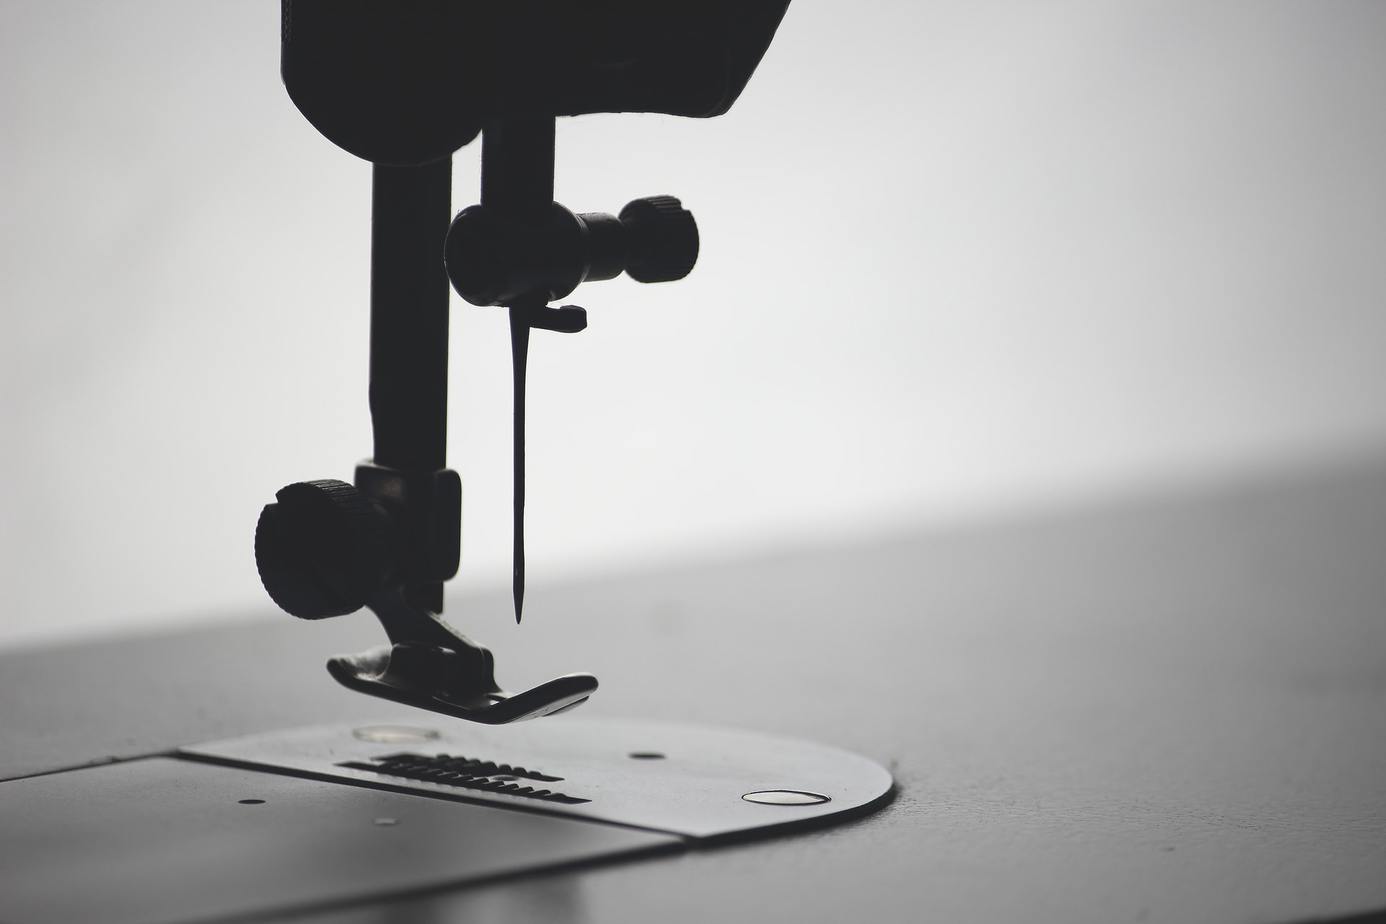 These elements are worth paying attention to when choosing a sewing machine